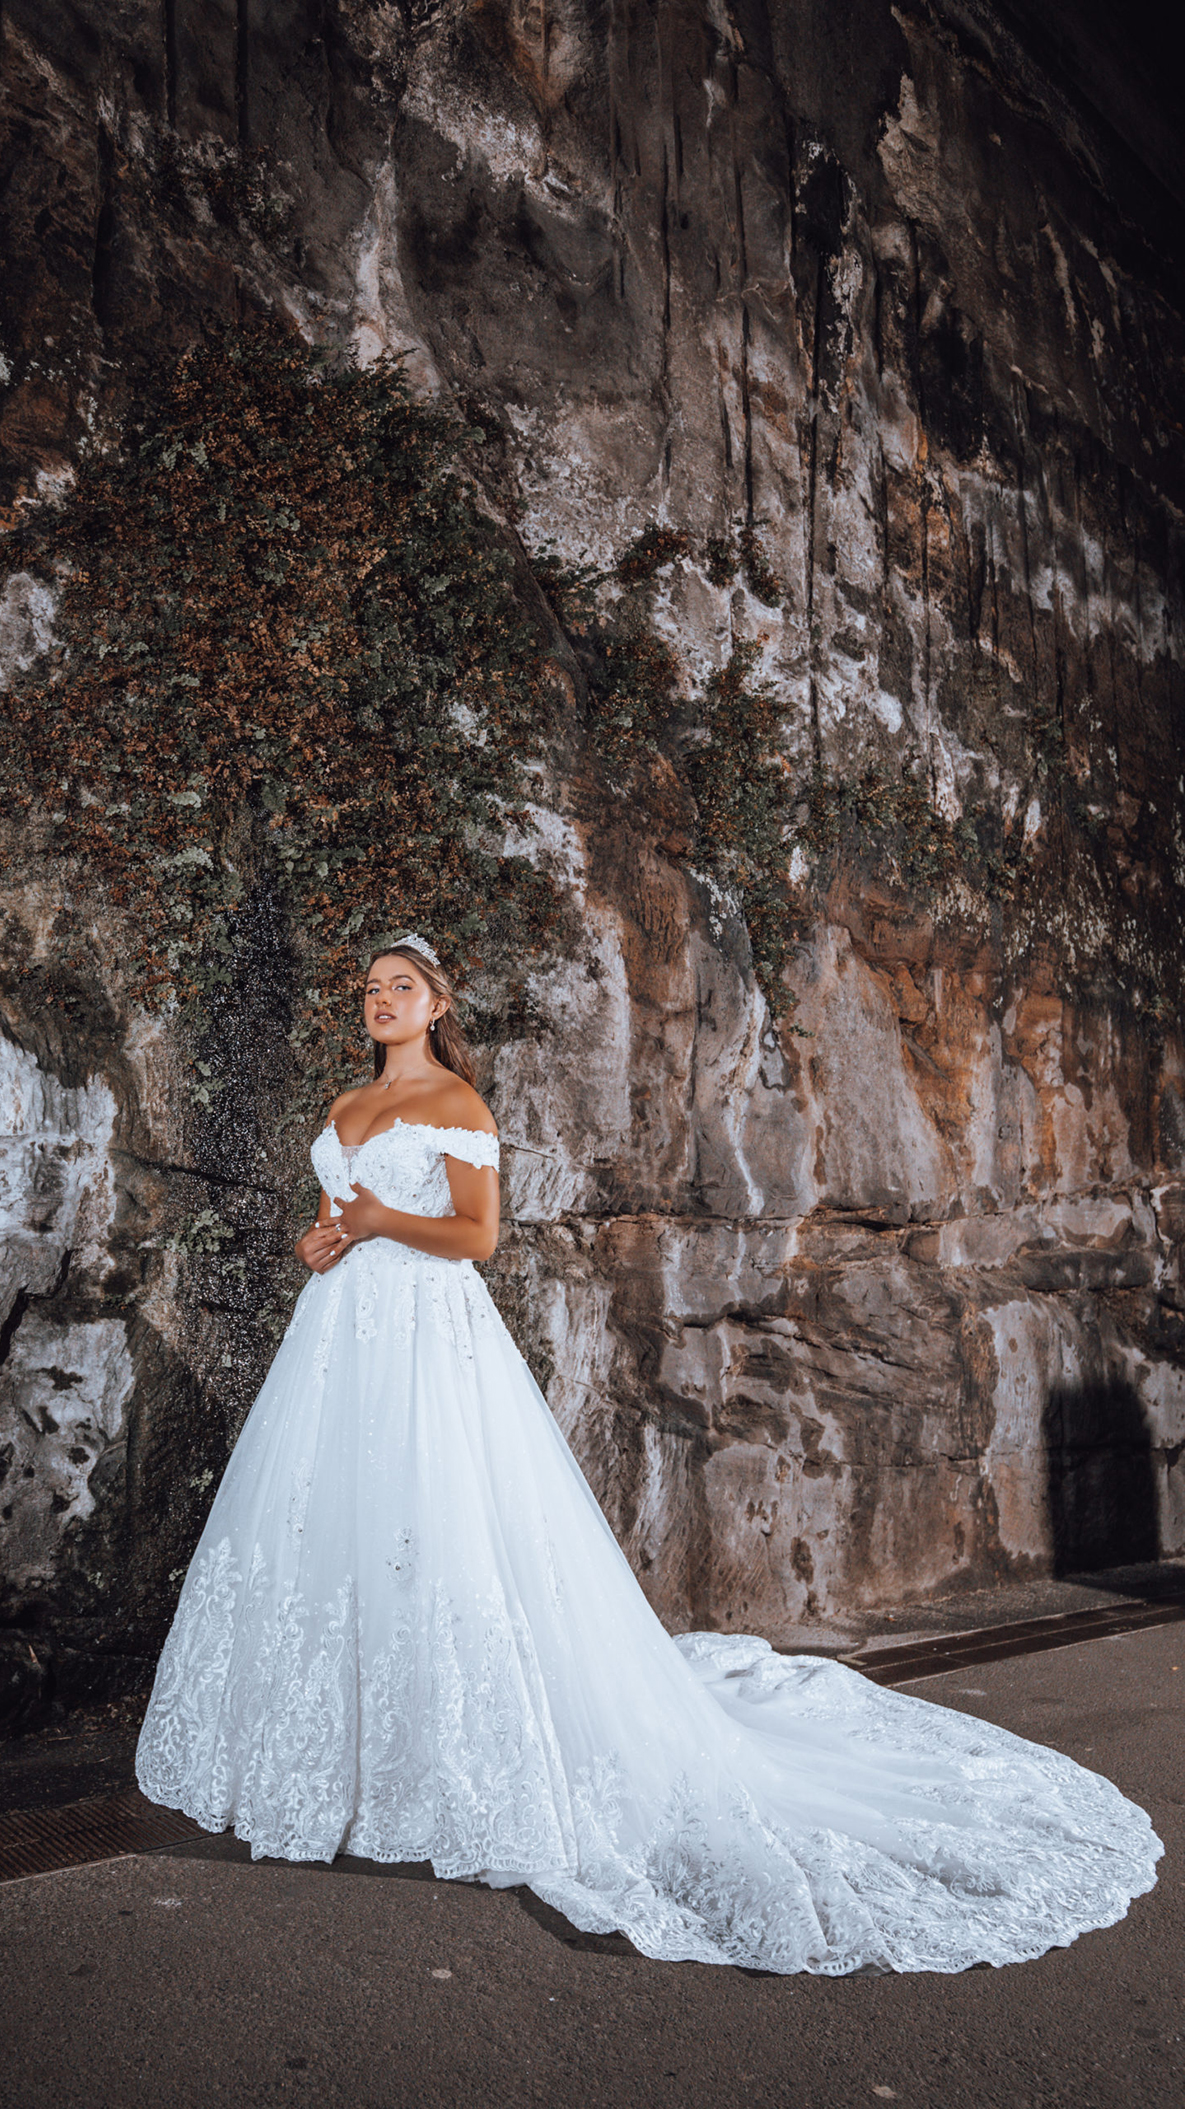 A-Line Bridal Gowns | Designer bridal gowns | Vision in White